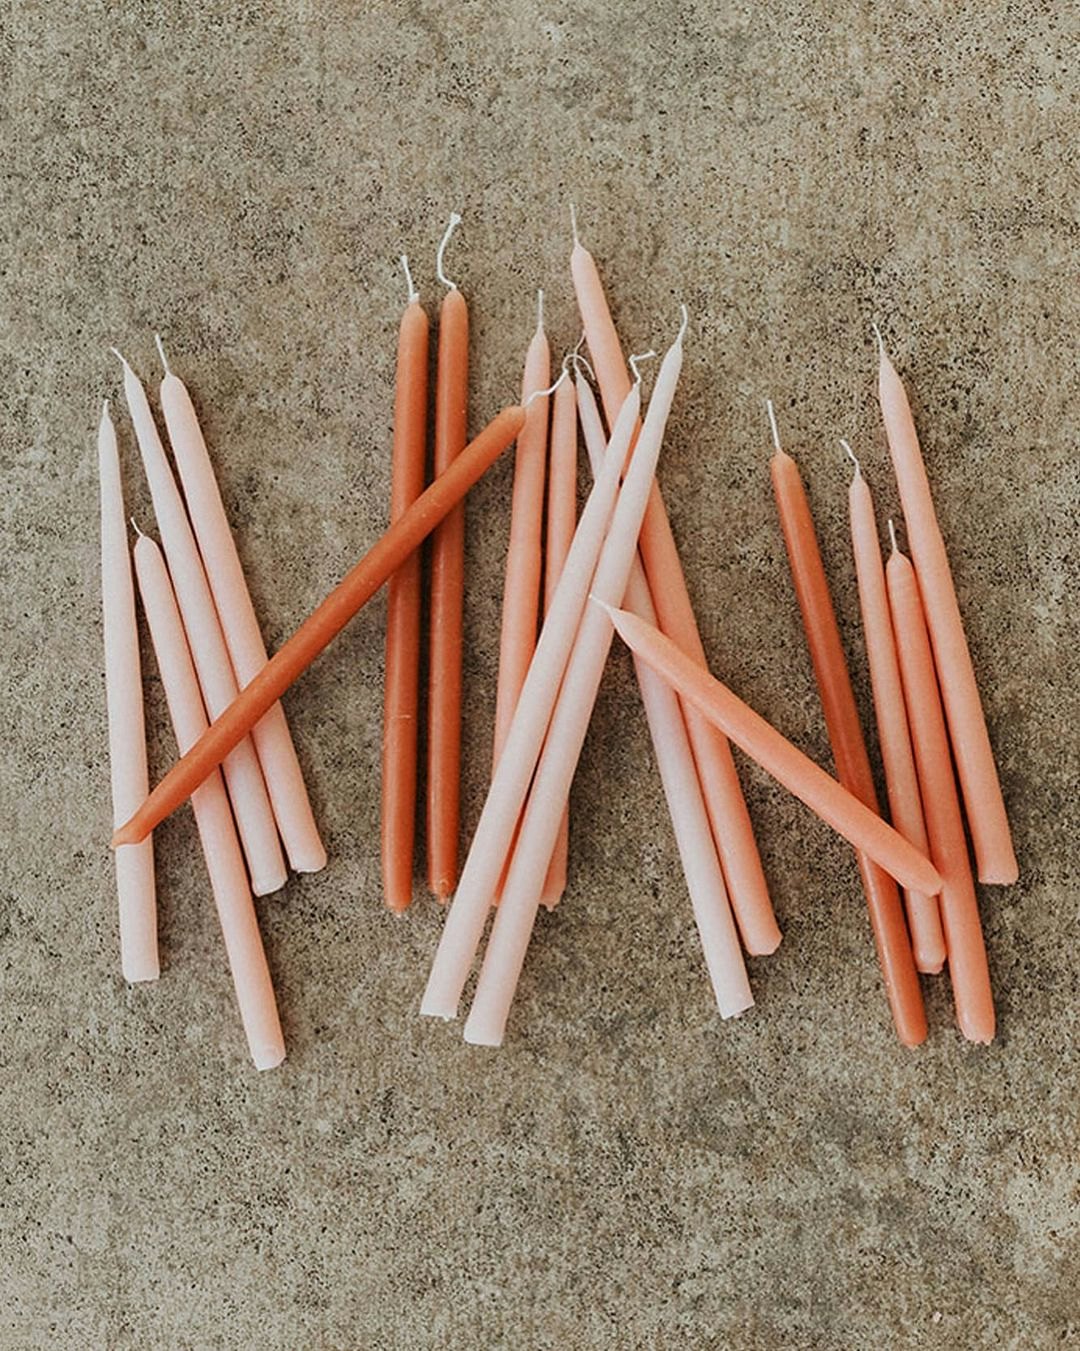 Pink, orange and tangerine coloured taper candles laying on a concrete floor 